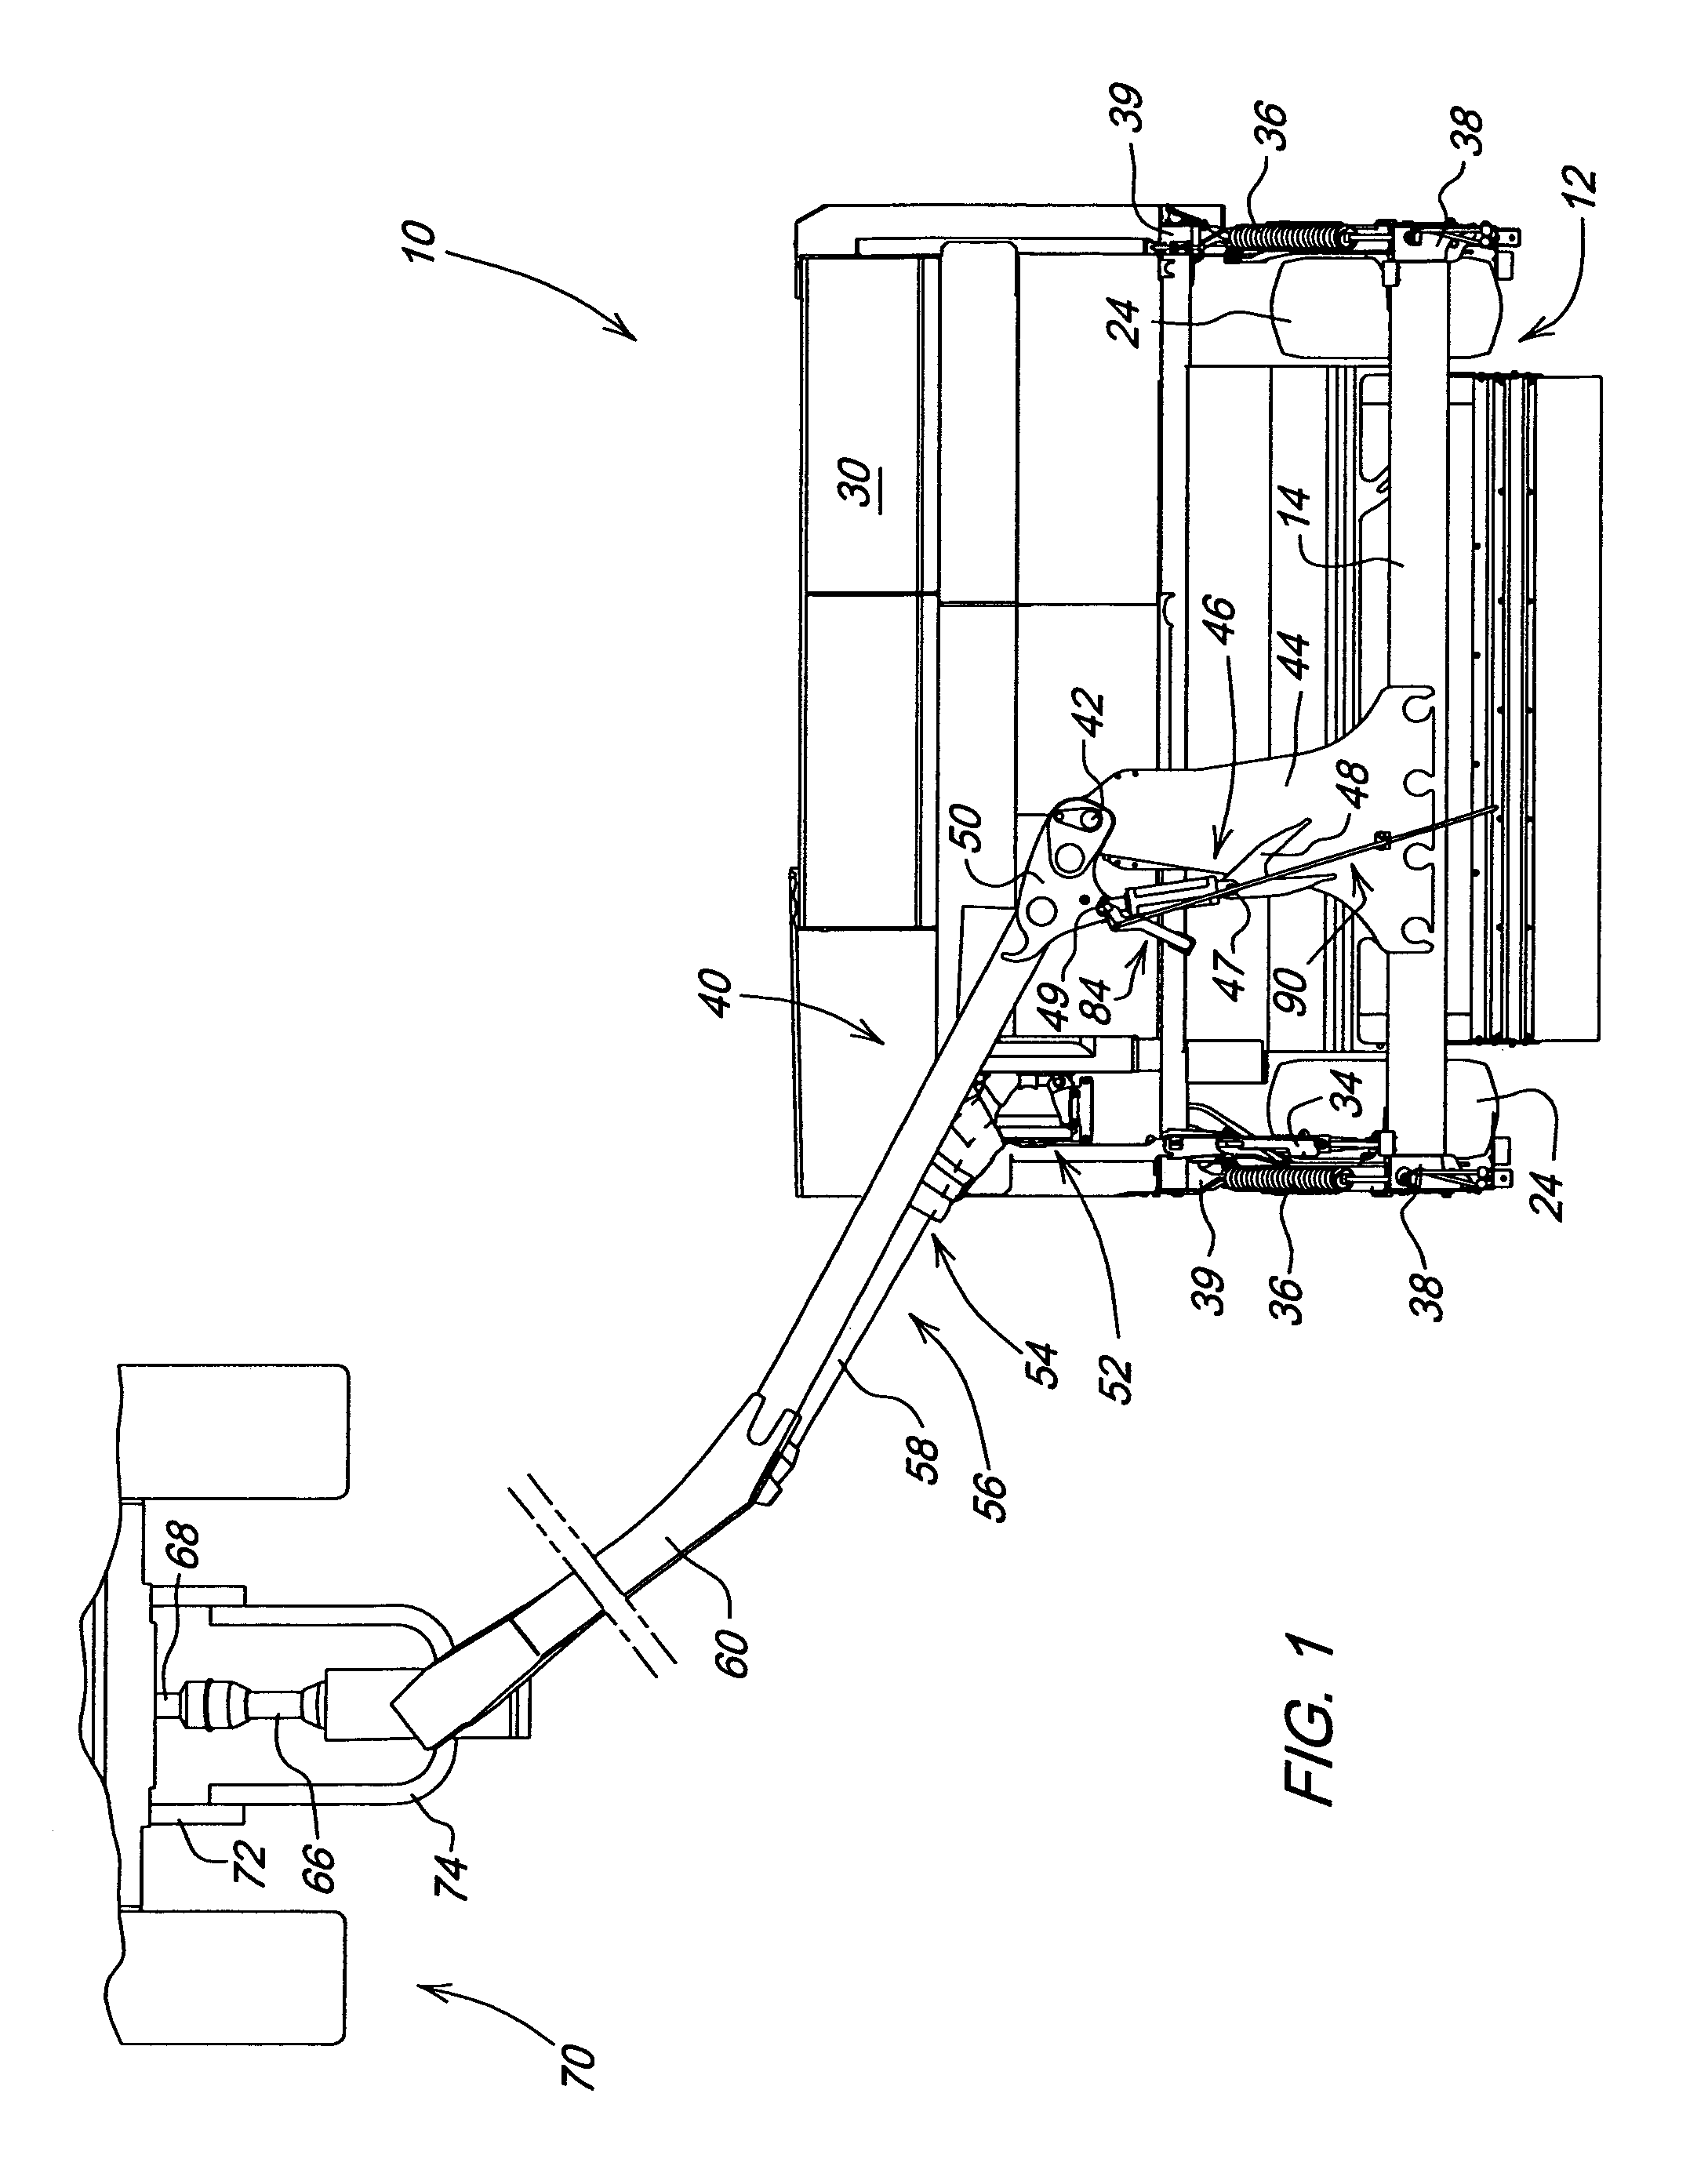 Tongue swing cylinder arrangement for rotary side-pull mower-conditioner